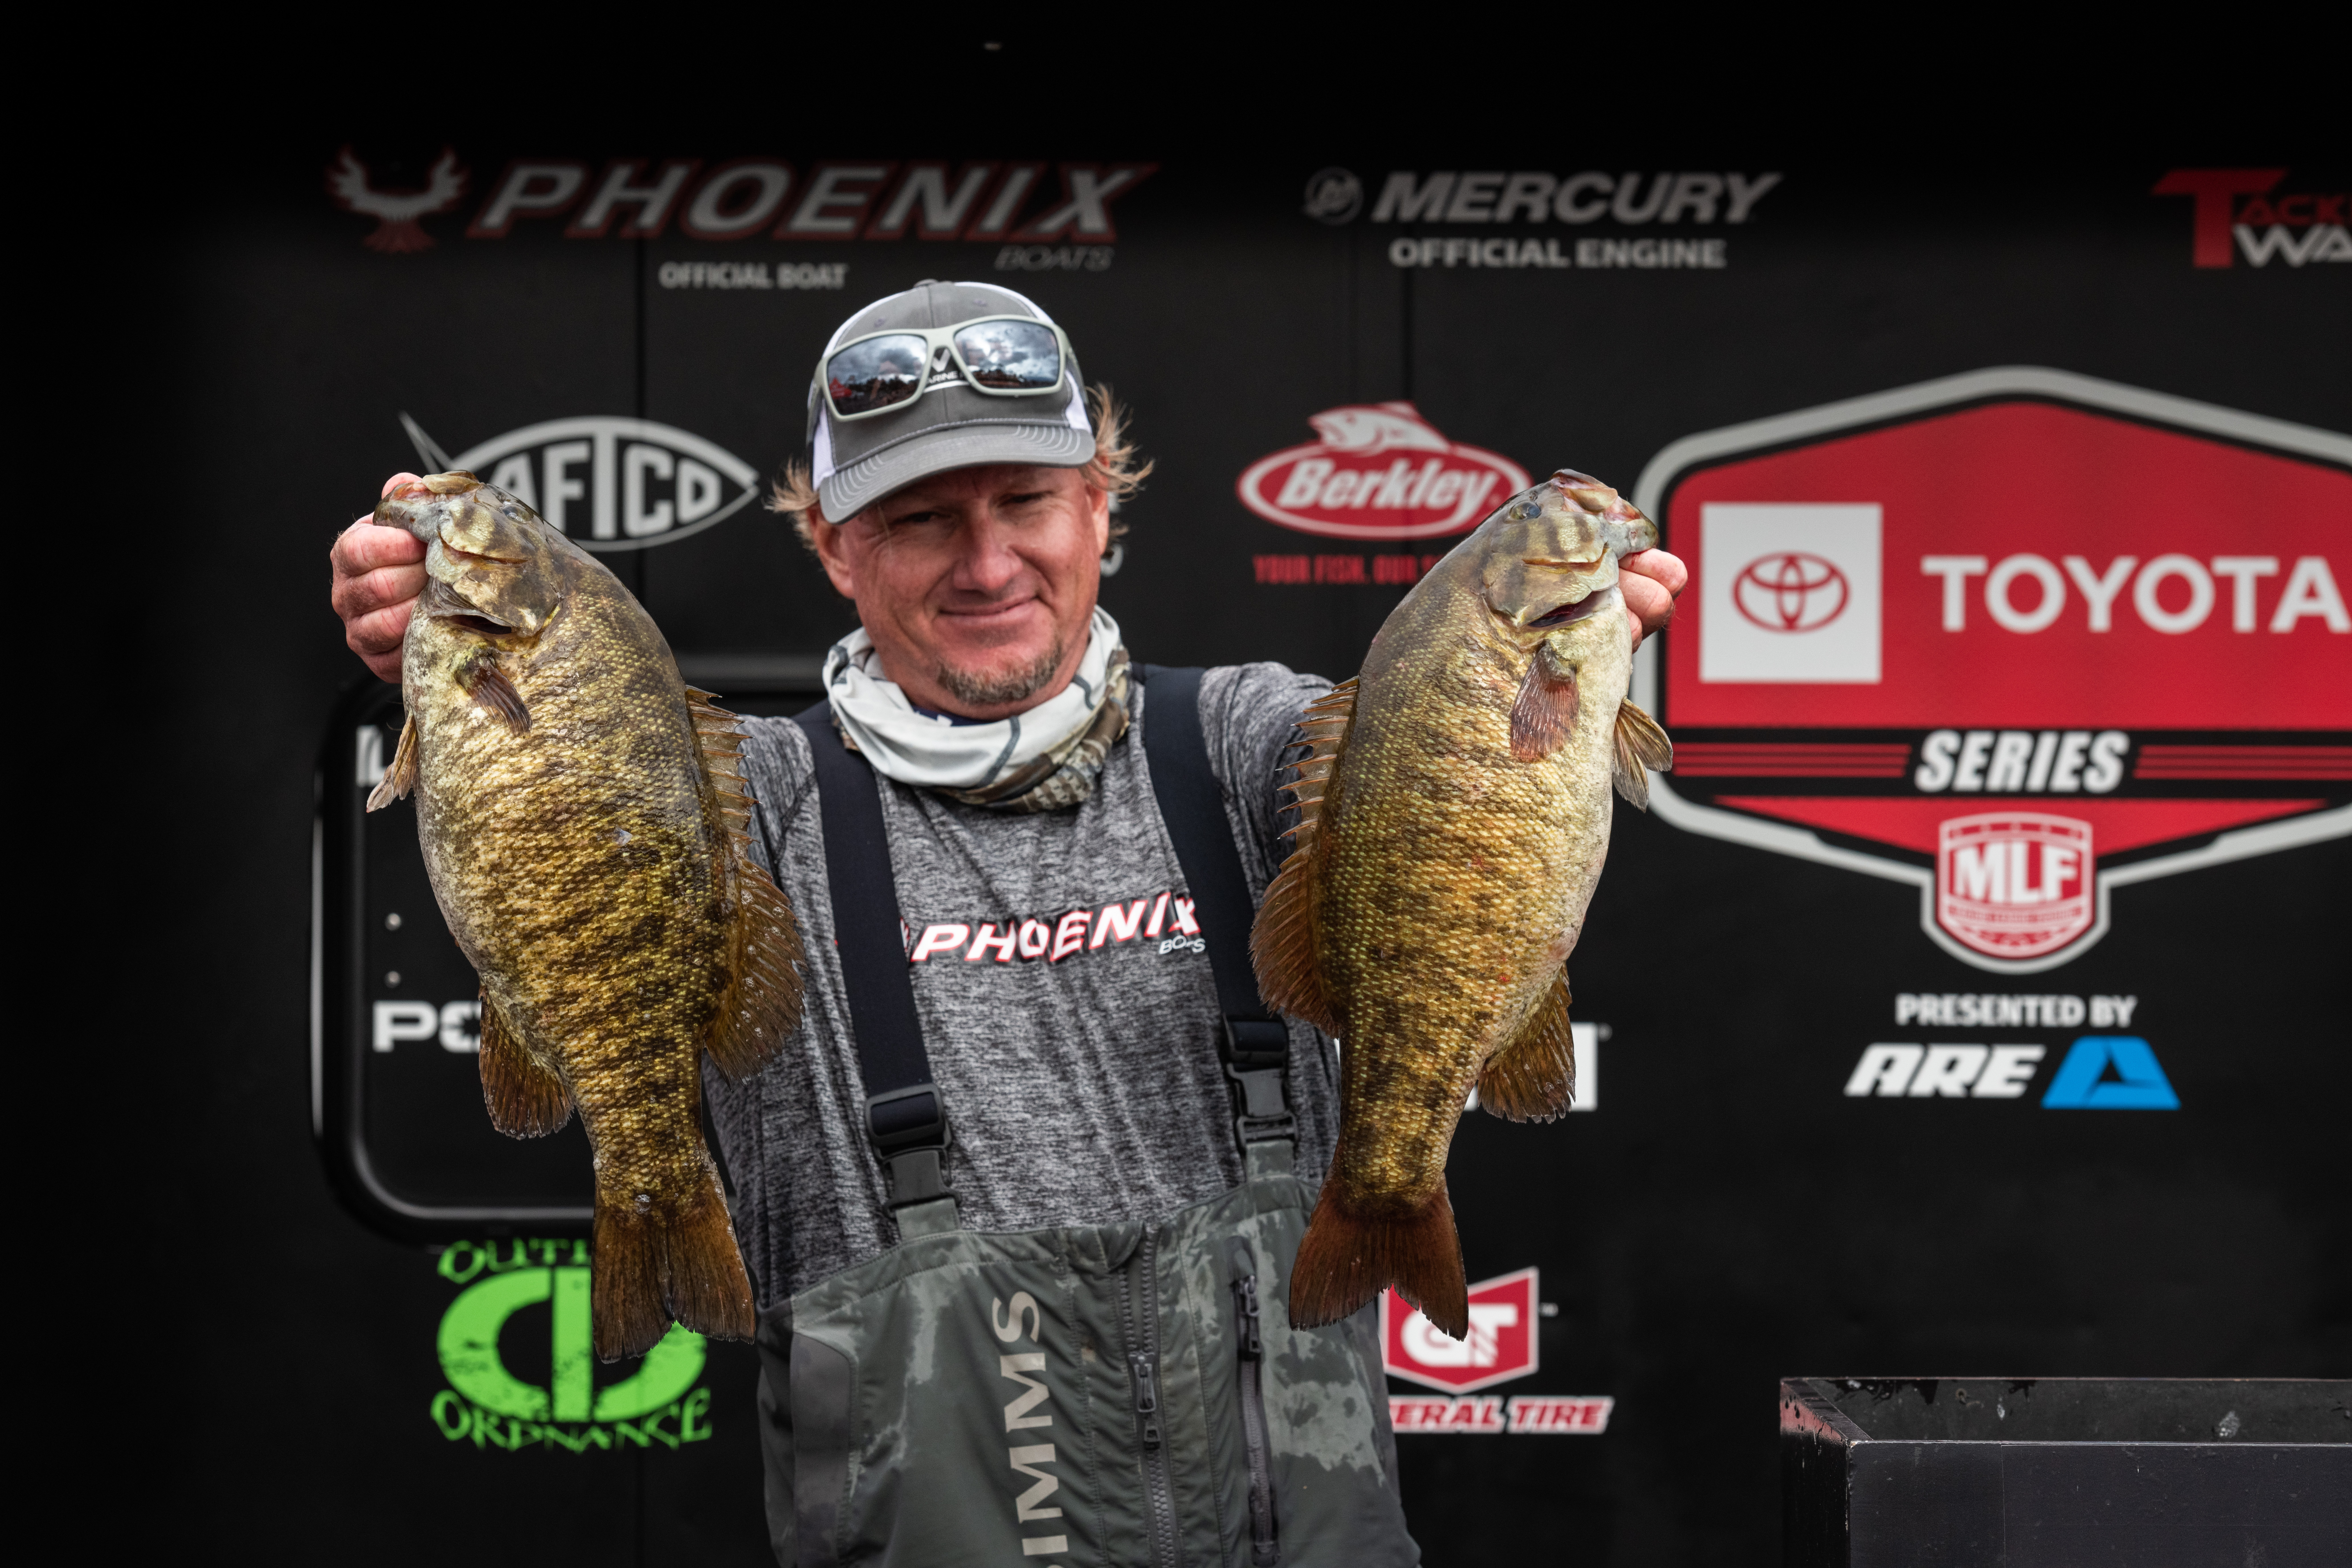 Top 5 Patterns - Day 1 on the St. Lawrence River - Major League